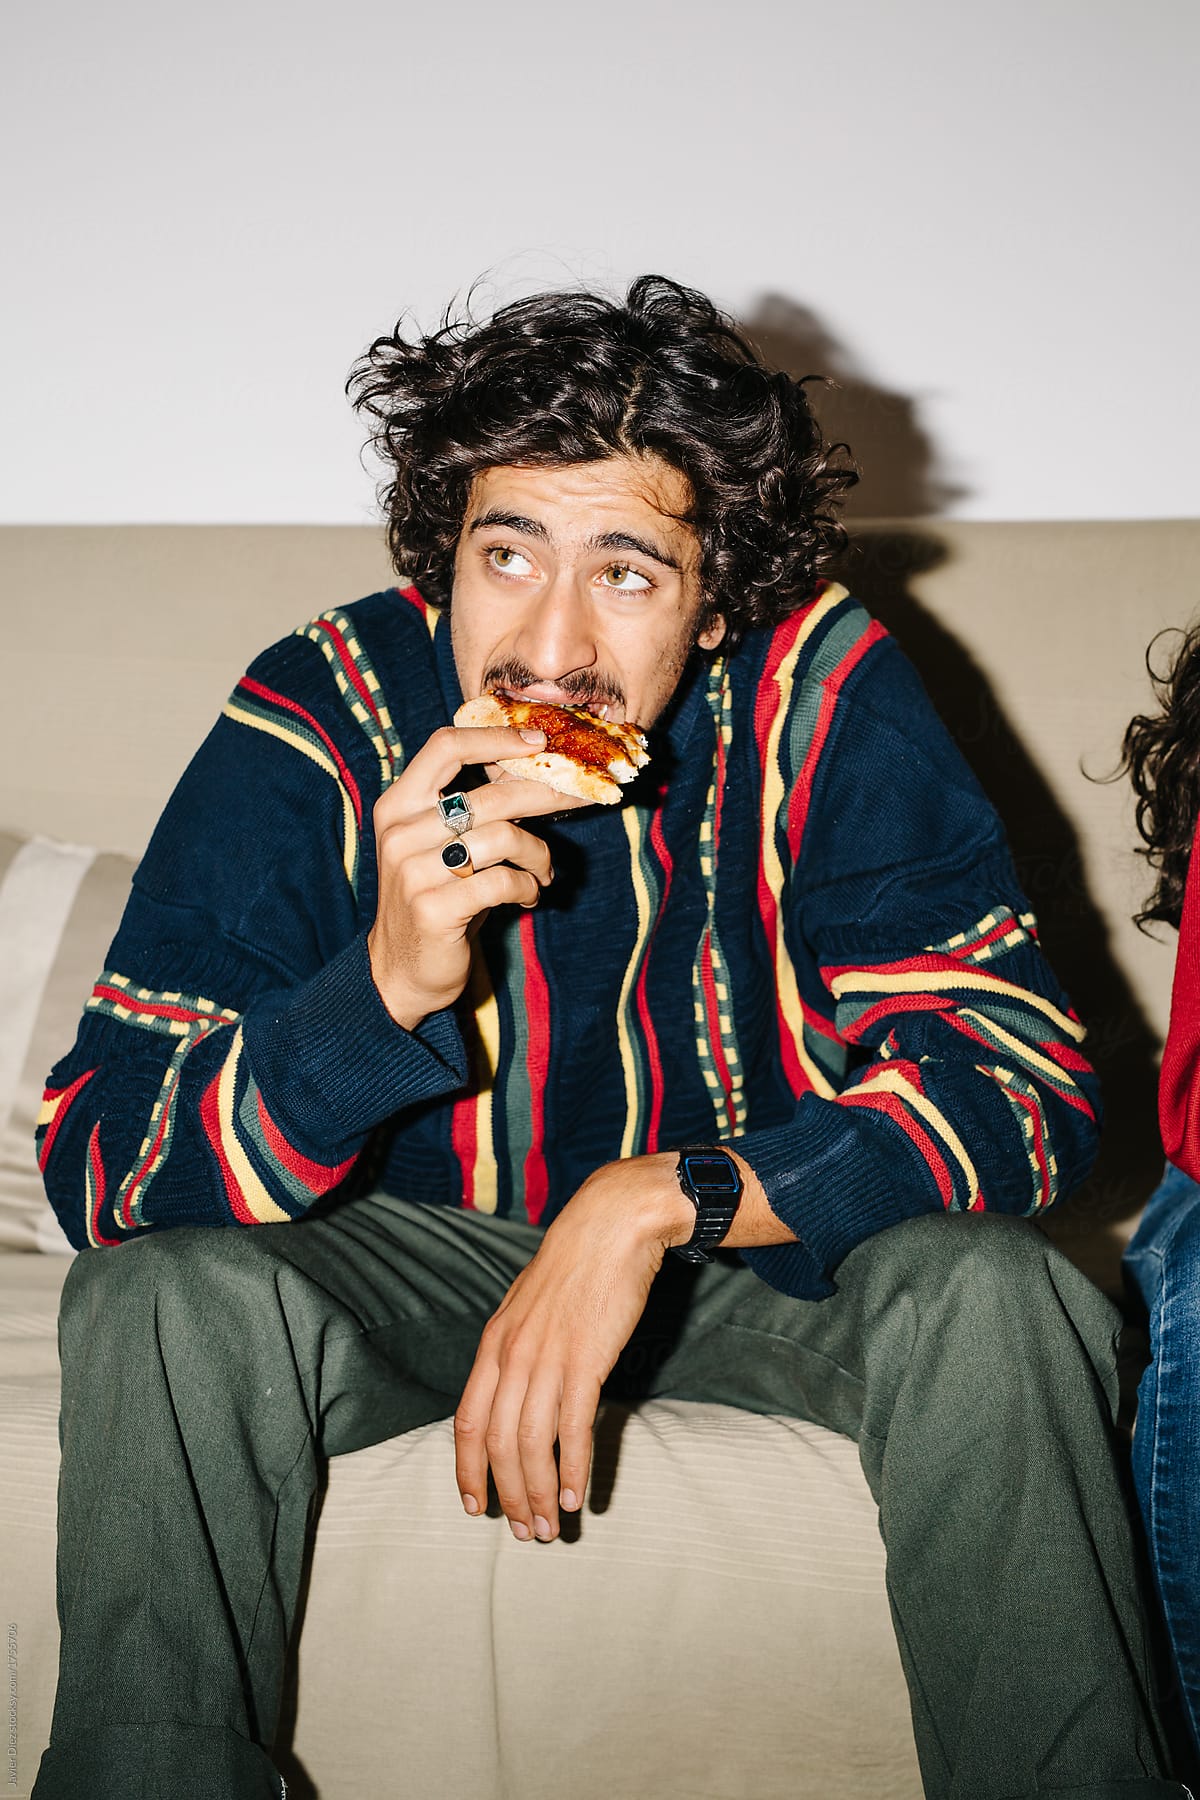 Man sitting and eating pizza